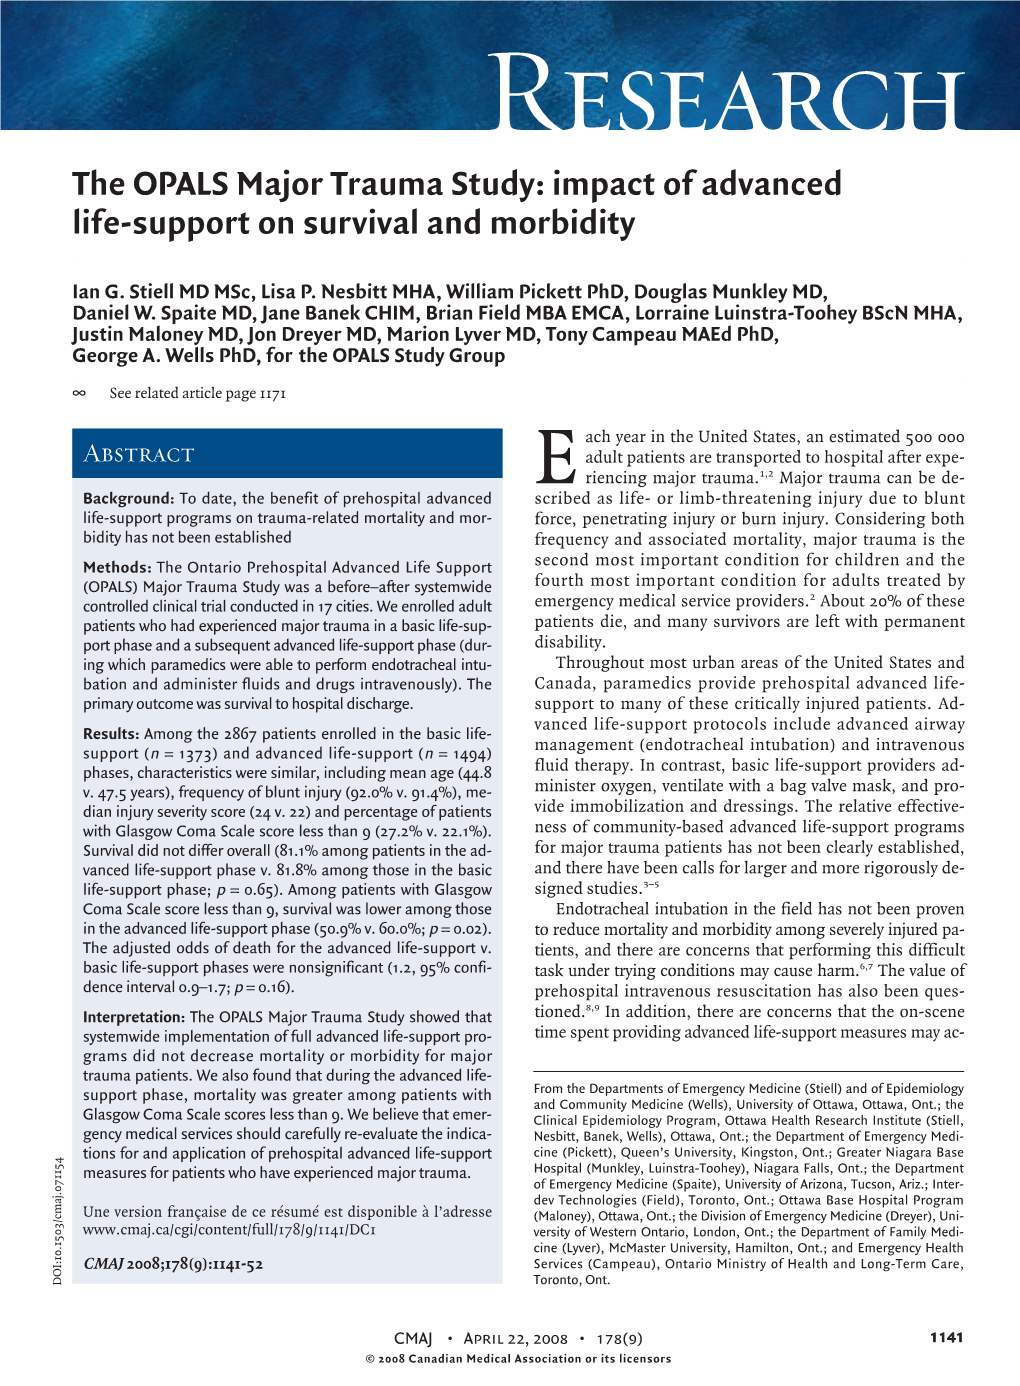 The OPALS Major Trauma Study: Impact of Advanced Life-Support on Survival and Morbidity